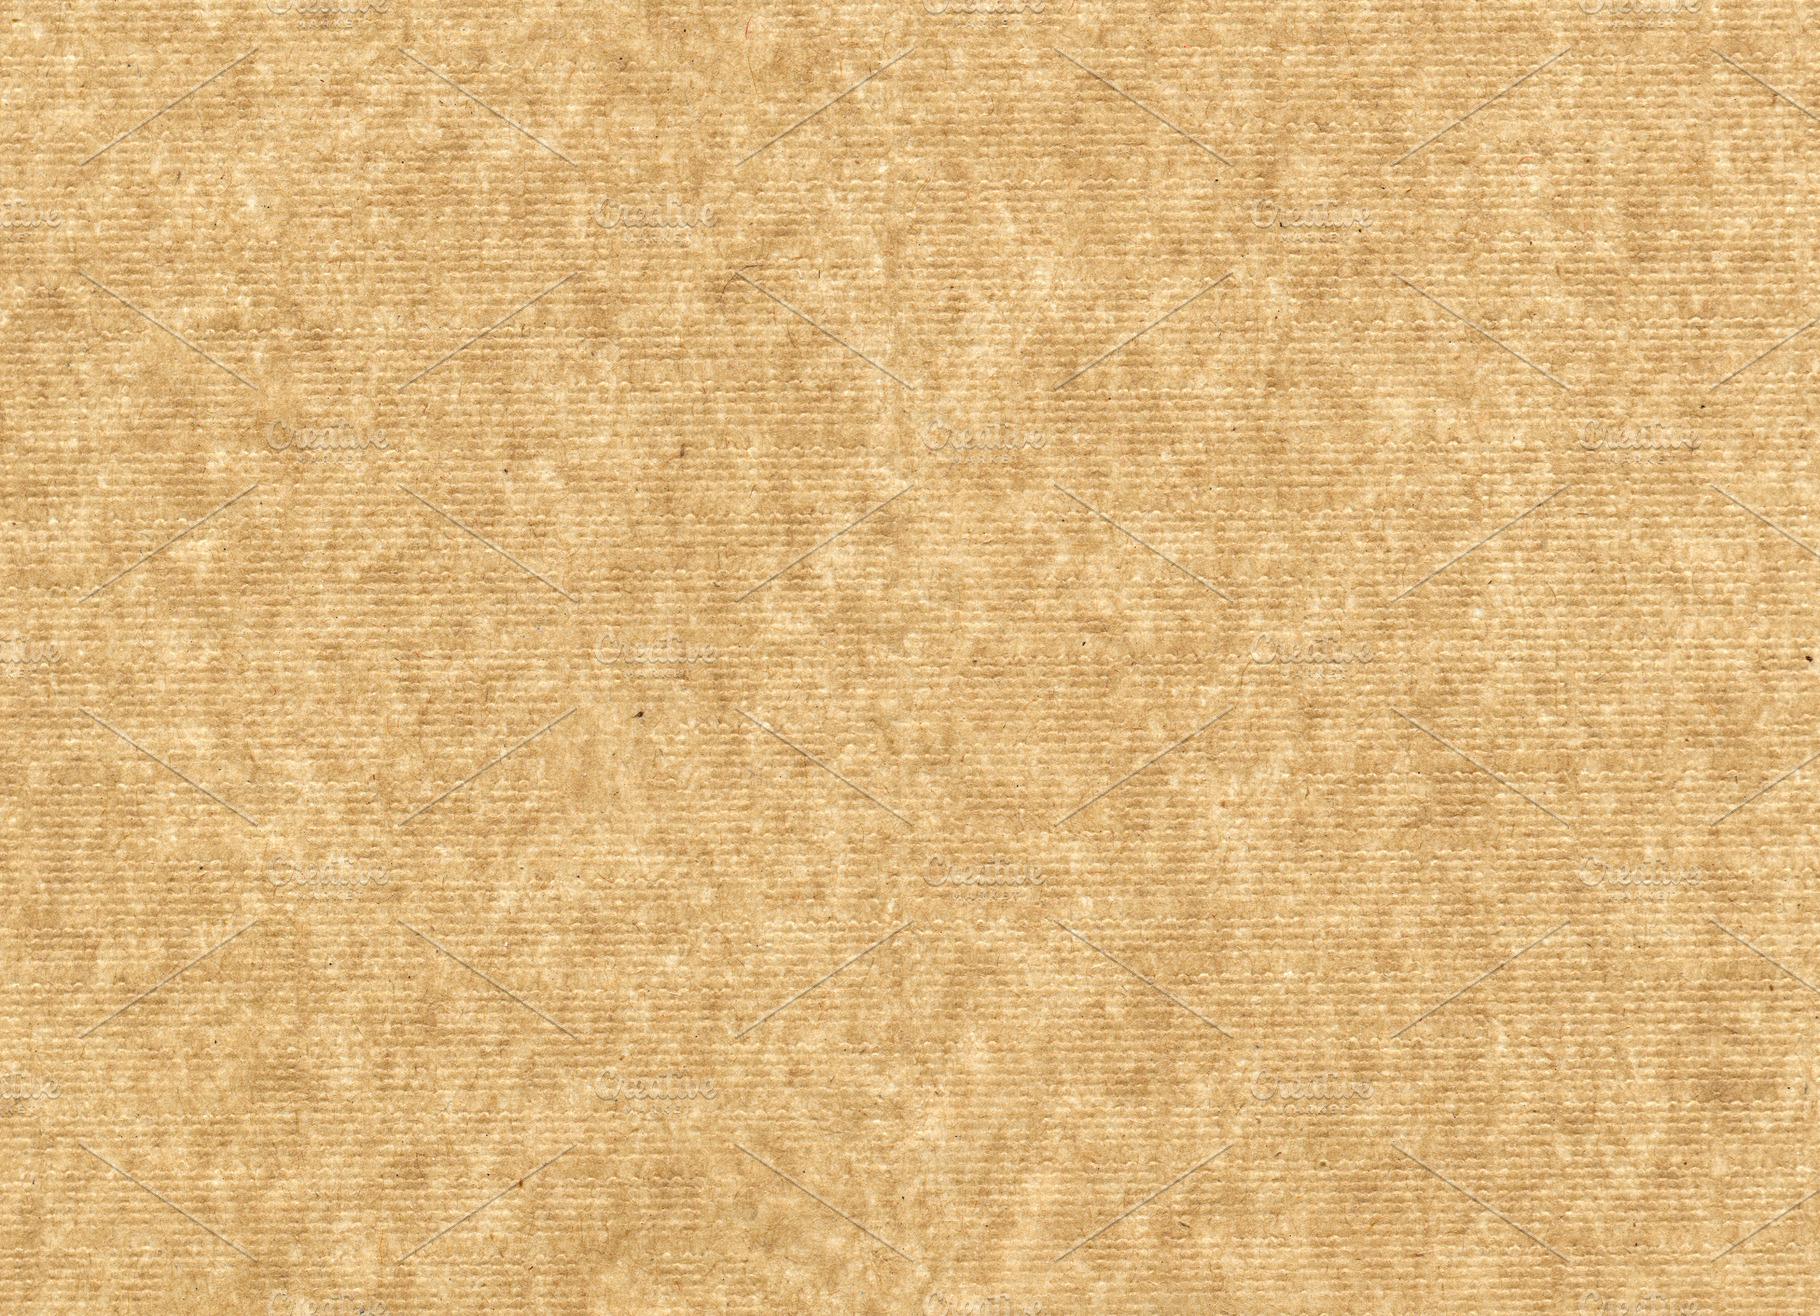 brown paper texture background | High-Quality Stock Photos ...